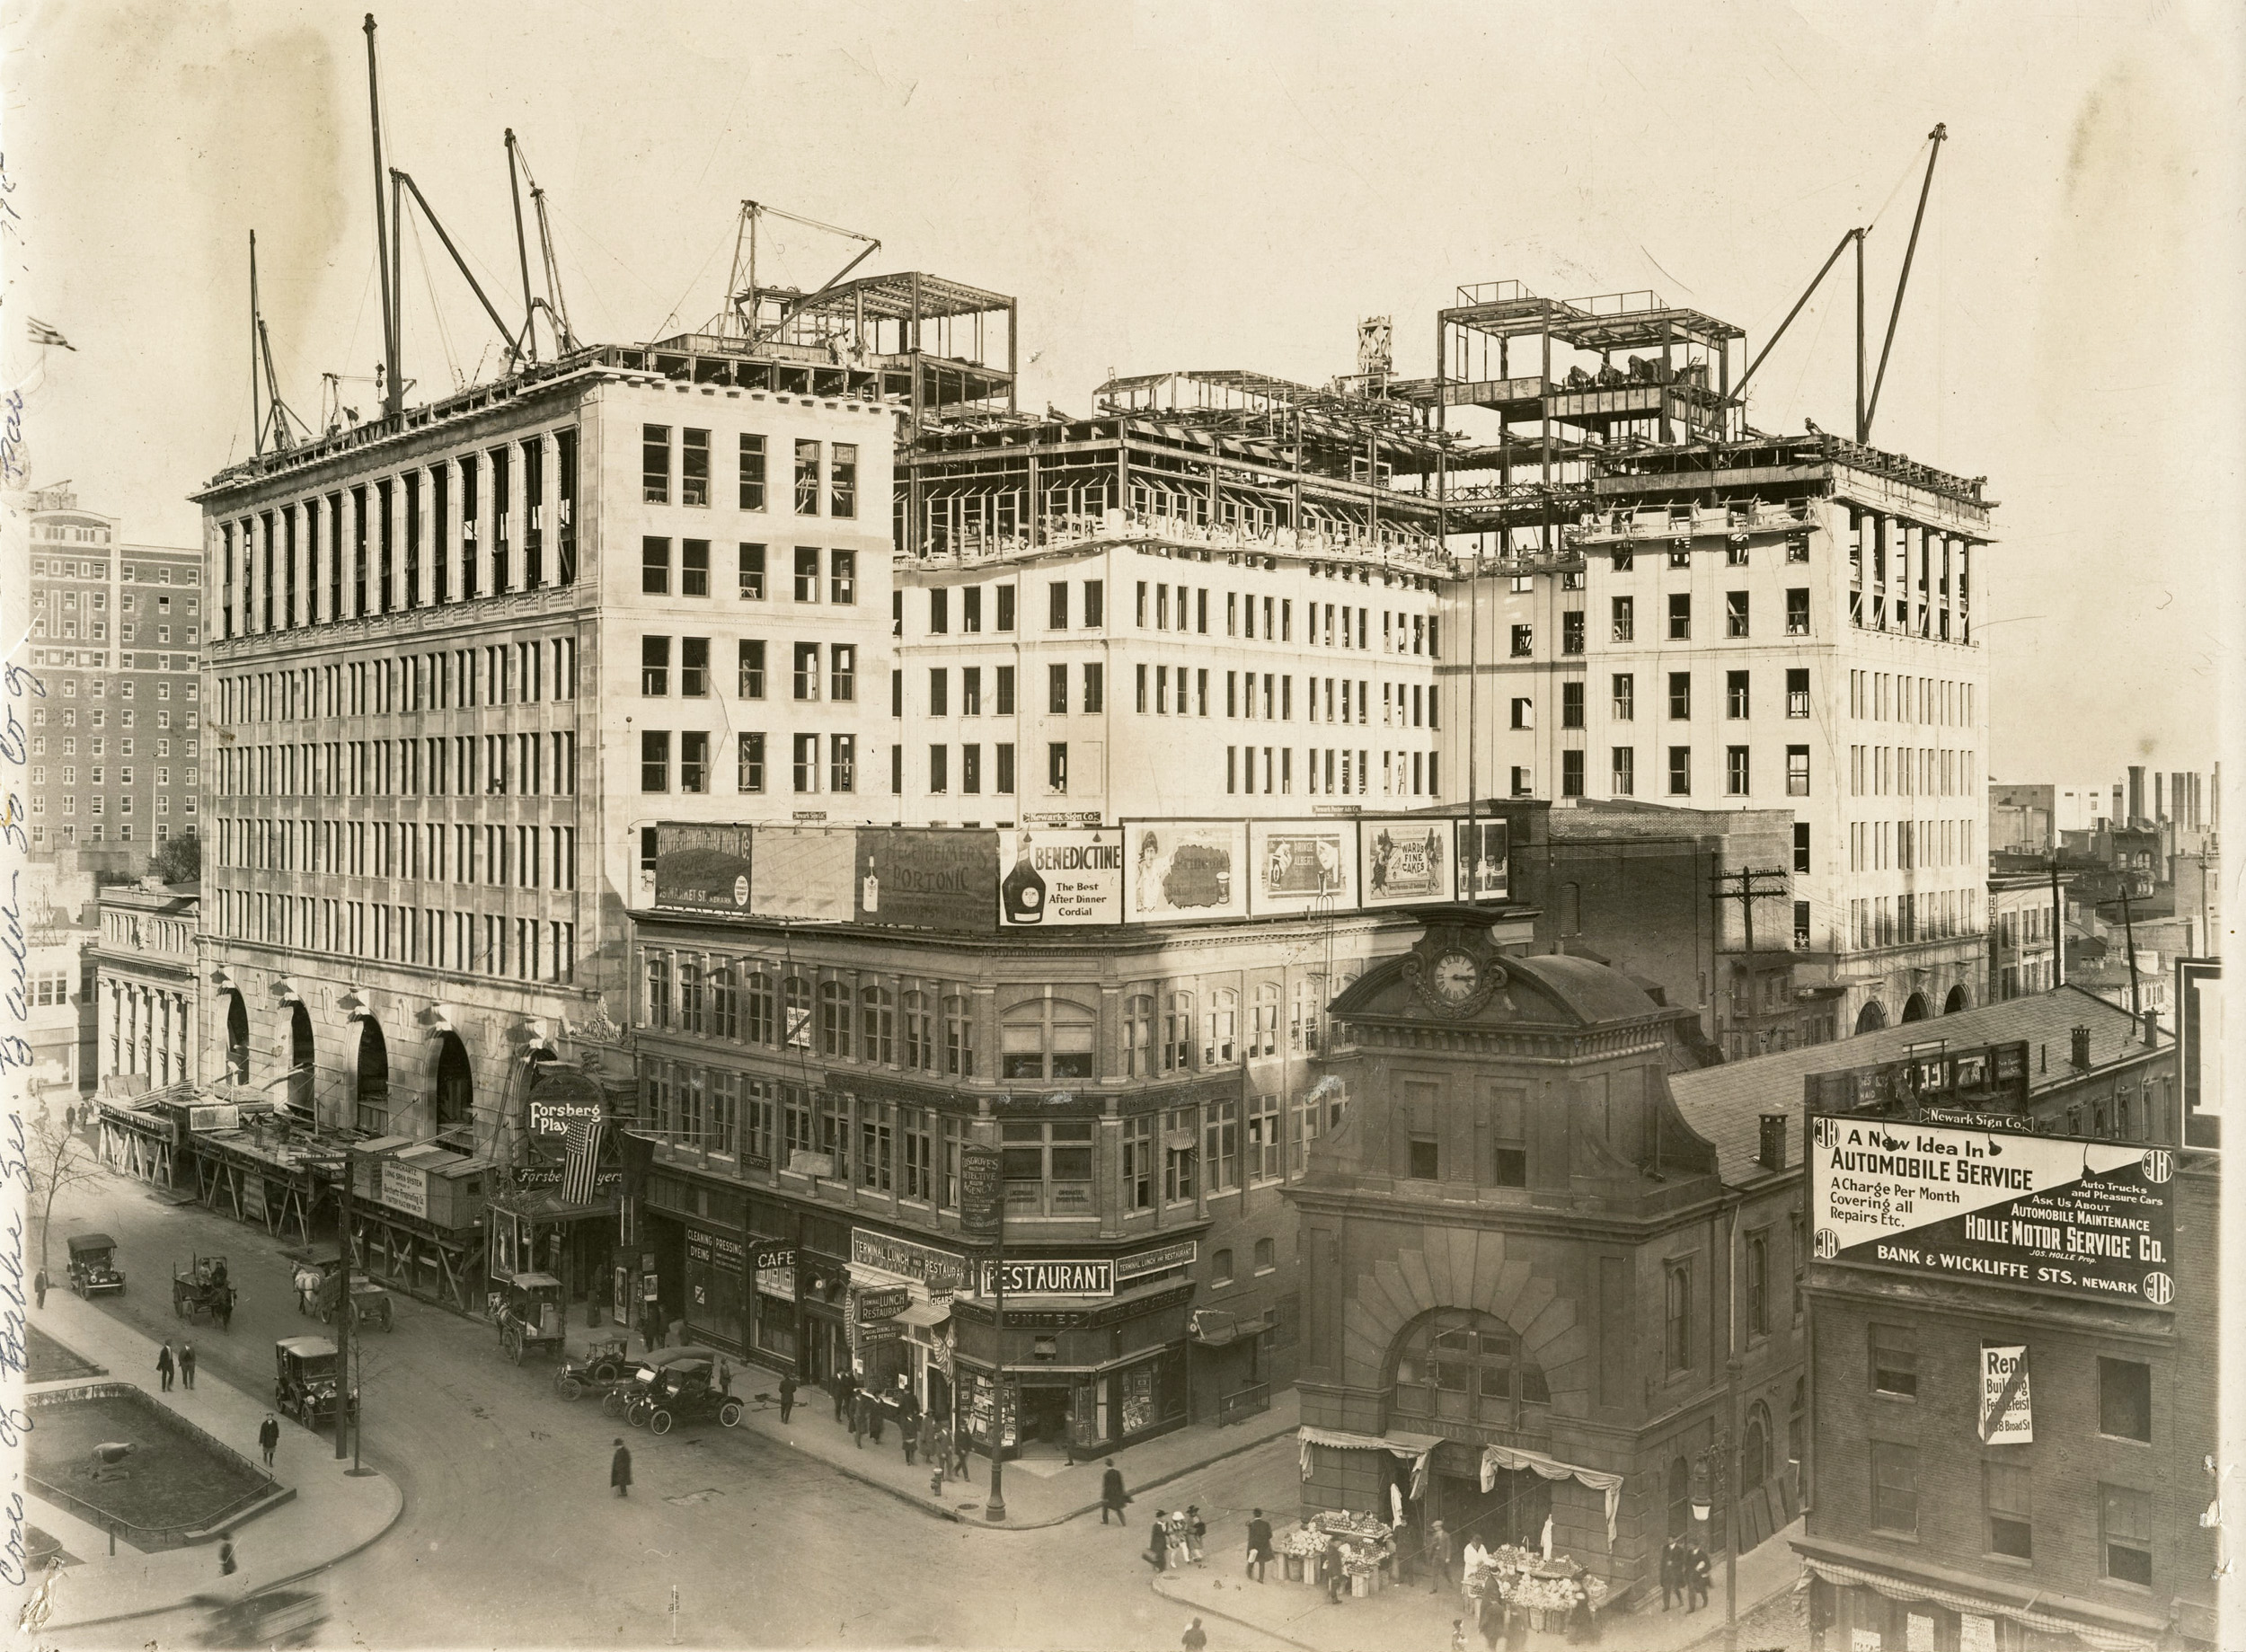 Downtown Newark, New Jersey, 1915. Construction of the Public Service Gas and Electric (PSEG) building. View full size.